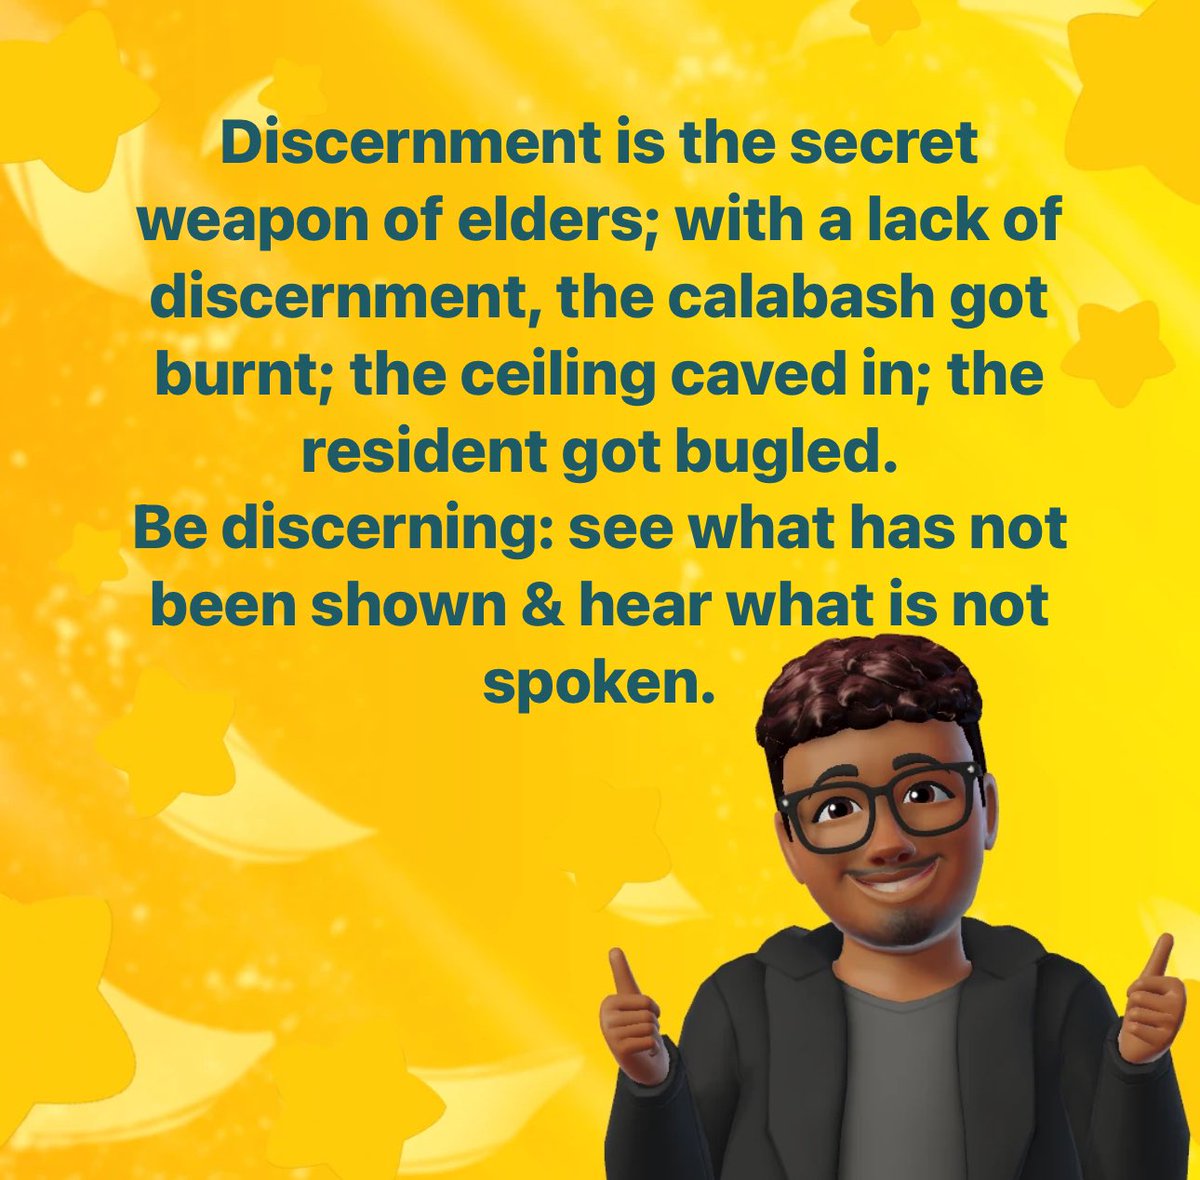 Discernment is the secret weapon of elders; with a lack of discernment, the calabash got burnt; the ceiling caved in; the resident got bugled.

Be discerning: see what has not been shown & hear what is not spoken.

#WiseWords #DailyWisdom #PositiveEnergy #Proverb #YorubaProverbs